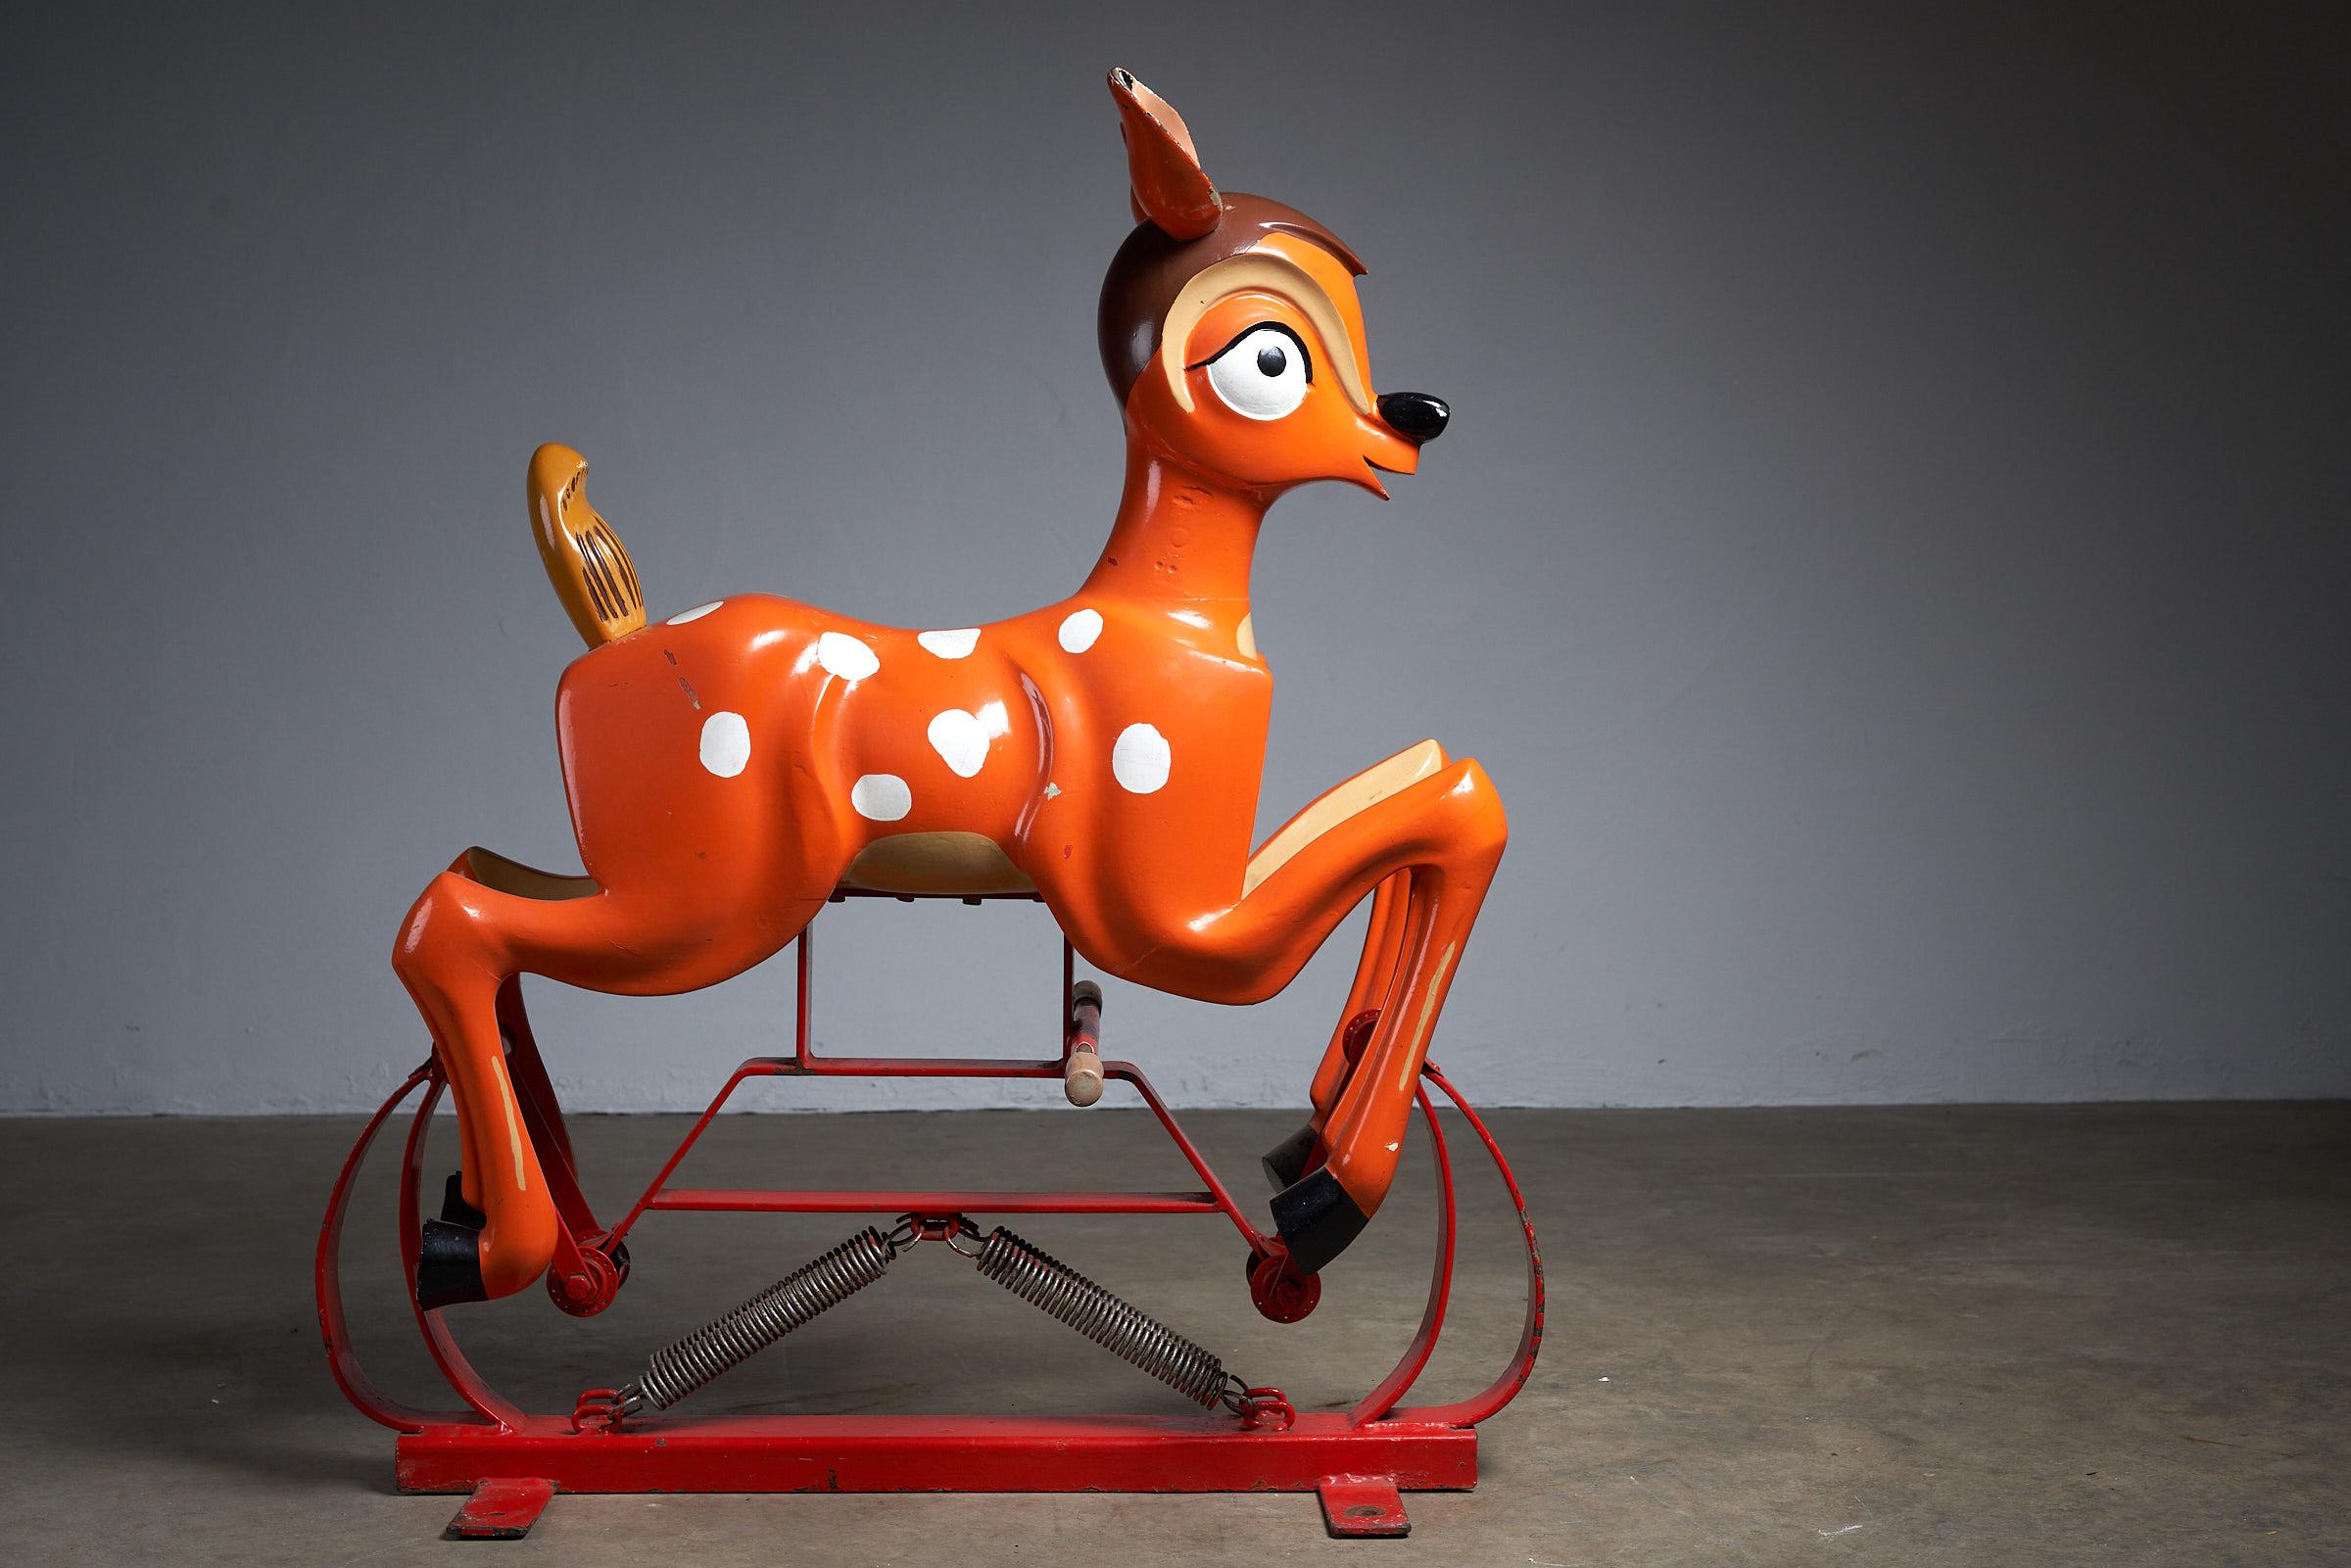 Capture the enchantment of childhood with this delightful antique carousel figure featuring a carved wooden Bambi. Mounted on a rocking metal frame, this nostalgic piece evokes the whimsy and charm of classic carousels. The intricate woodwork and